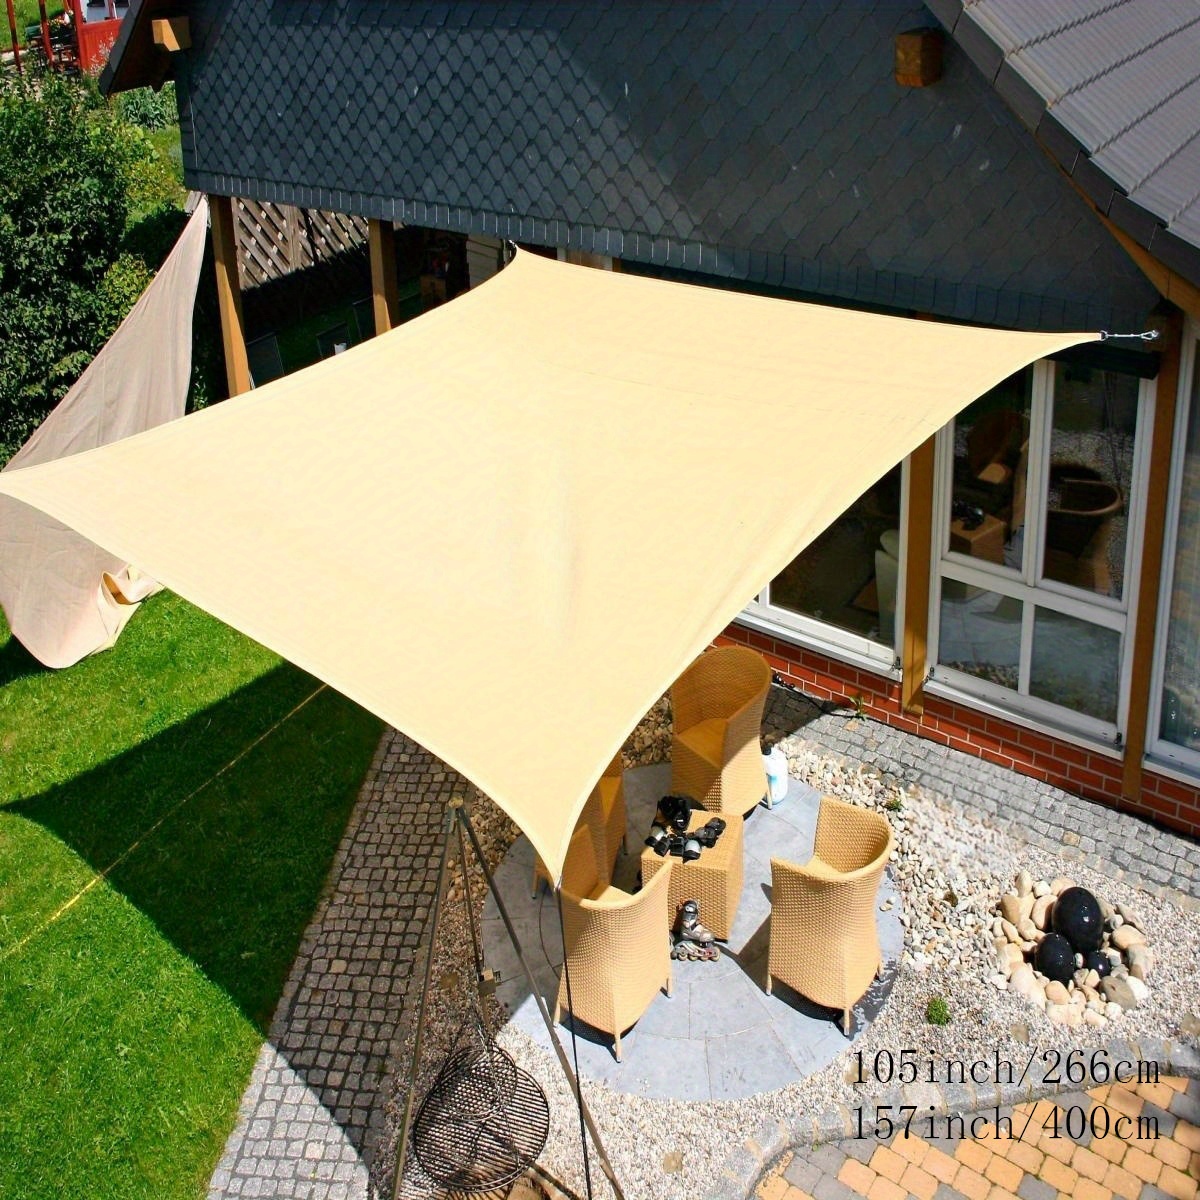 1 panel sun canopy shade sail rectangle uv block for patio deck yard and outdoor activities 105in 79in